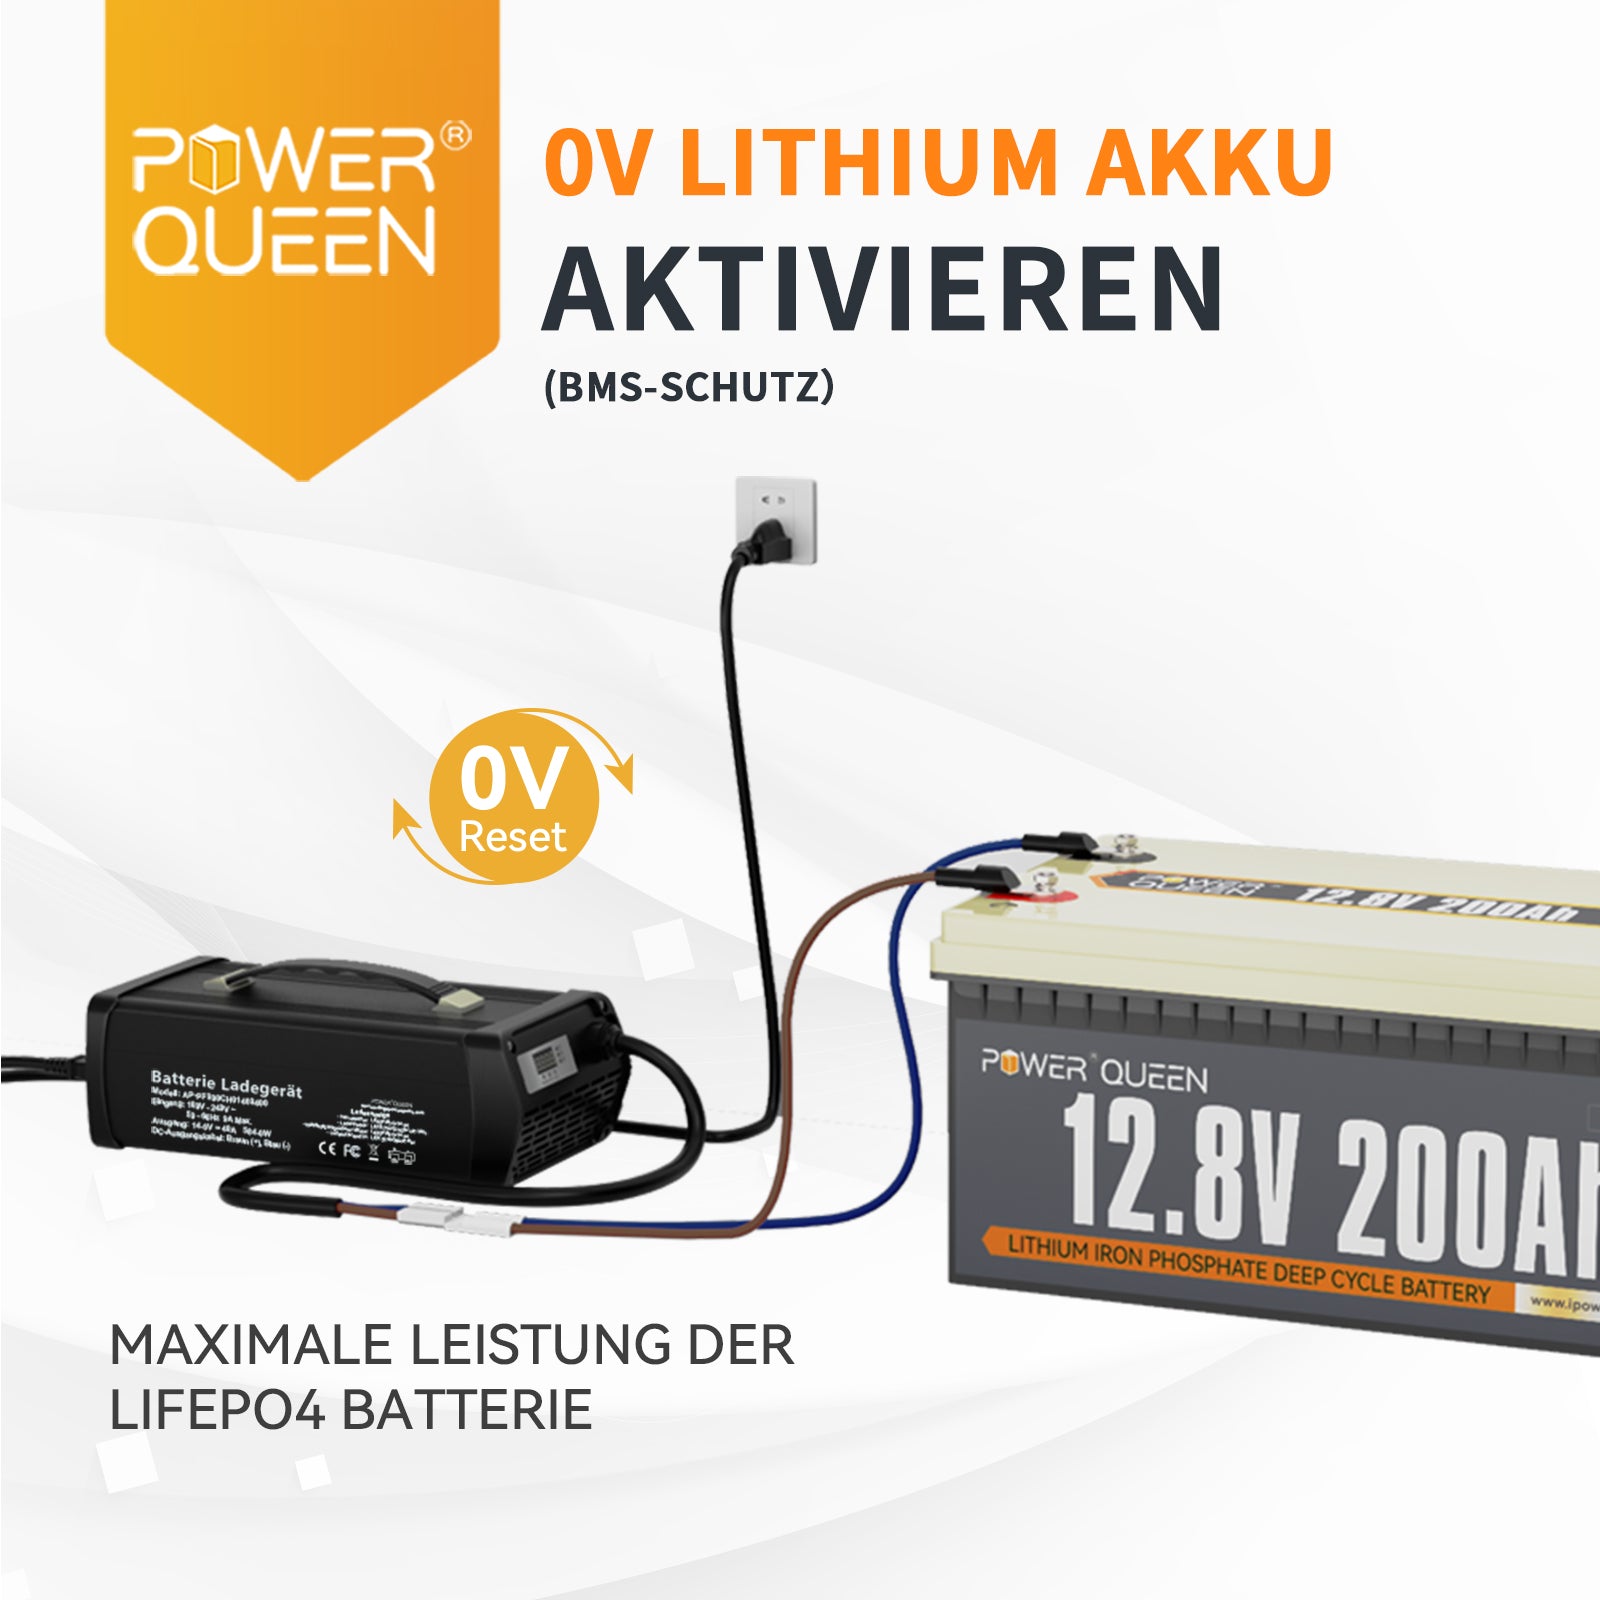 Chargeur Power Queen 14,6 V 40 A LiFePO4